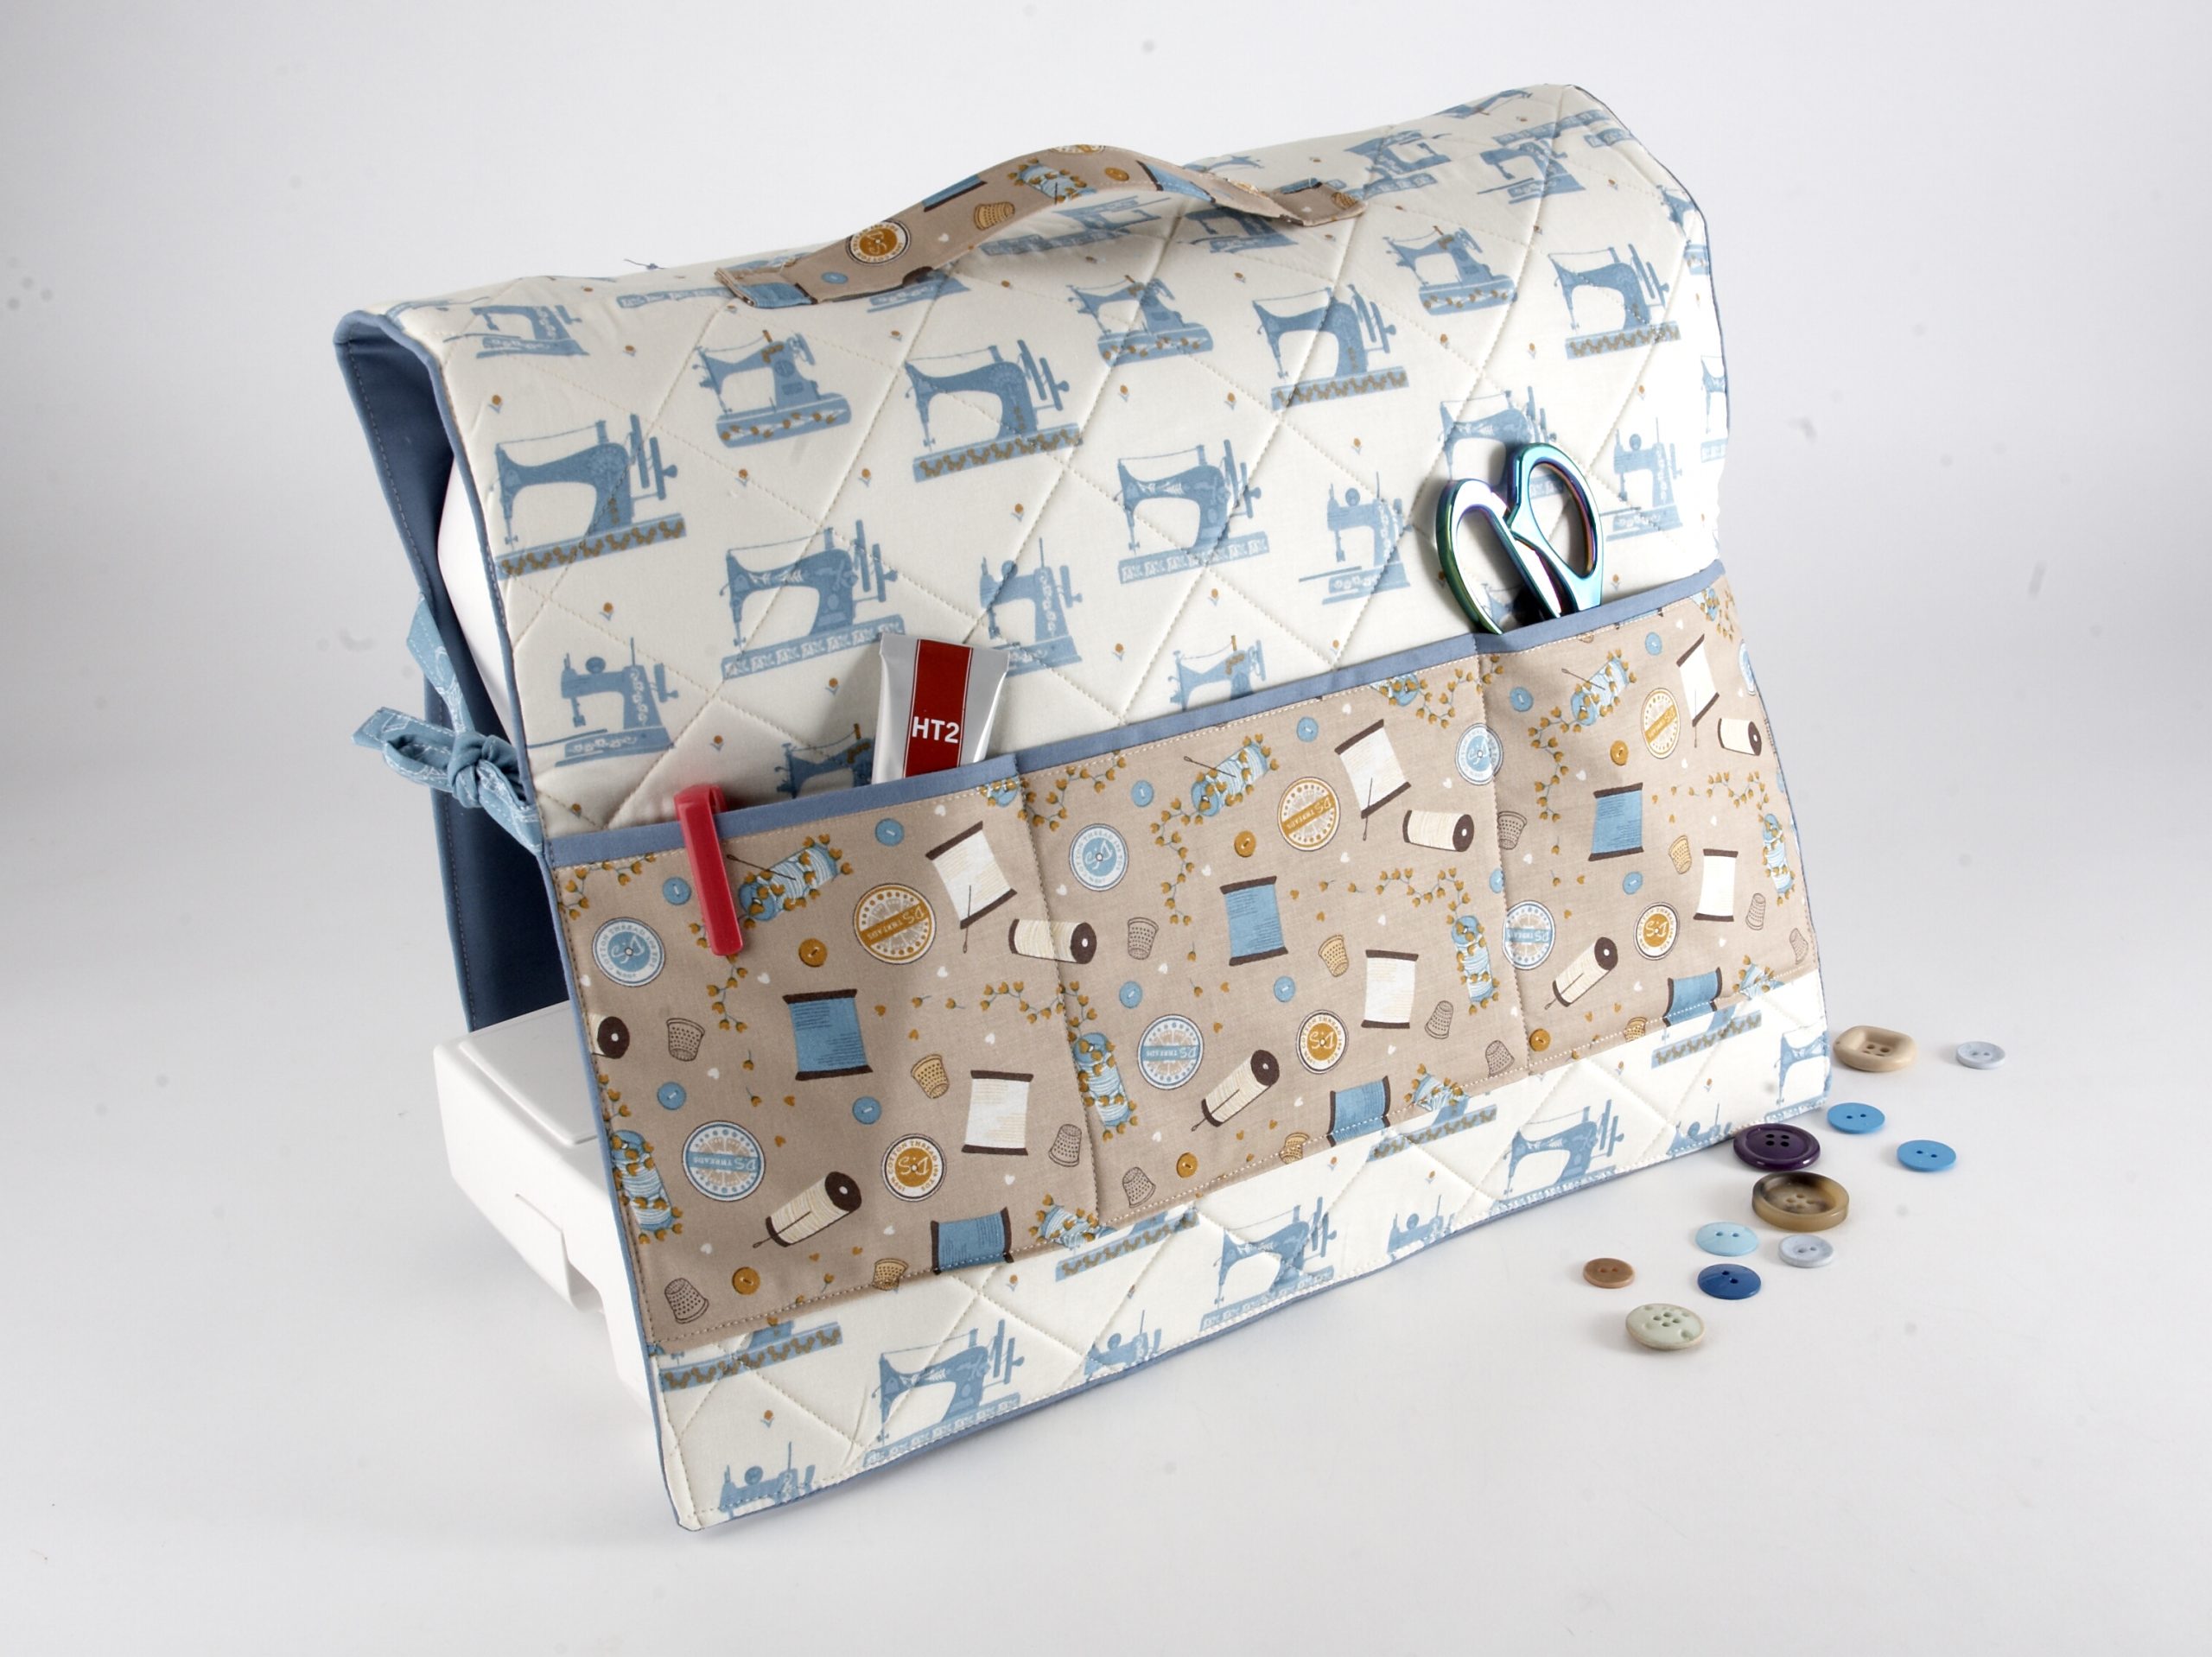 Make a sewing machine dust cover! by Debbie Shore 